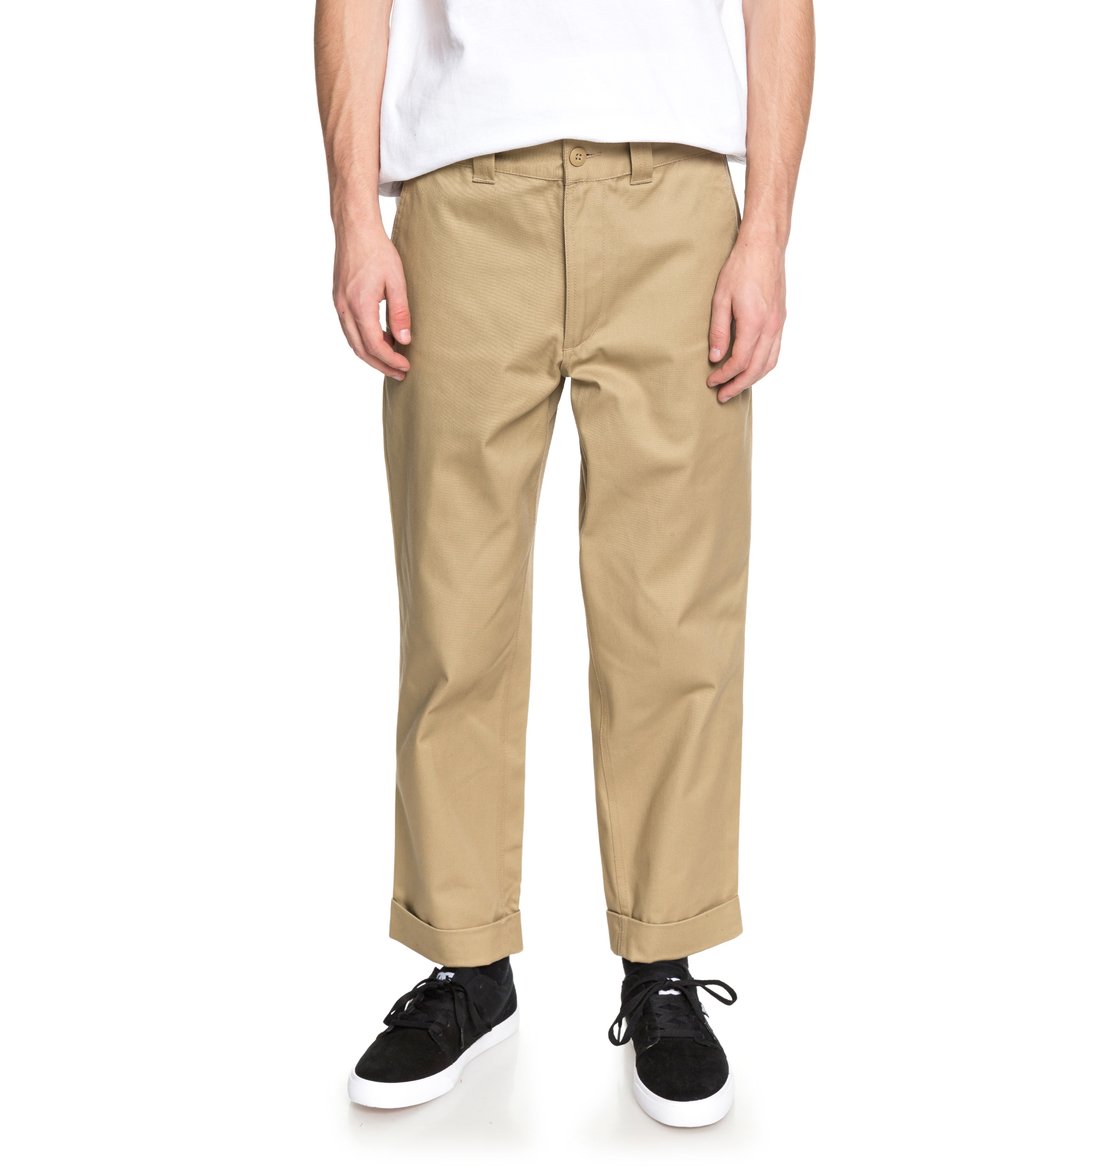 Men's Rolled On Baggy Chinos EDYNP03134 | DC Shoes